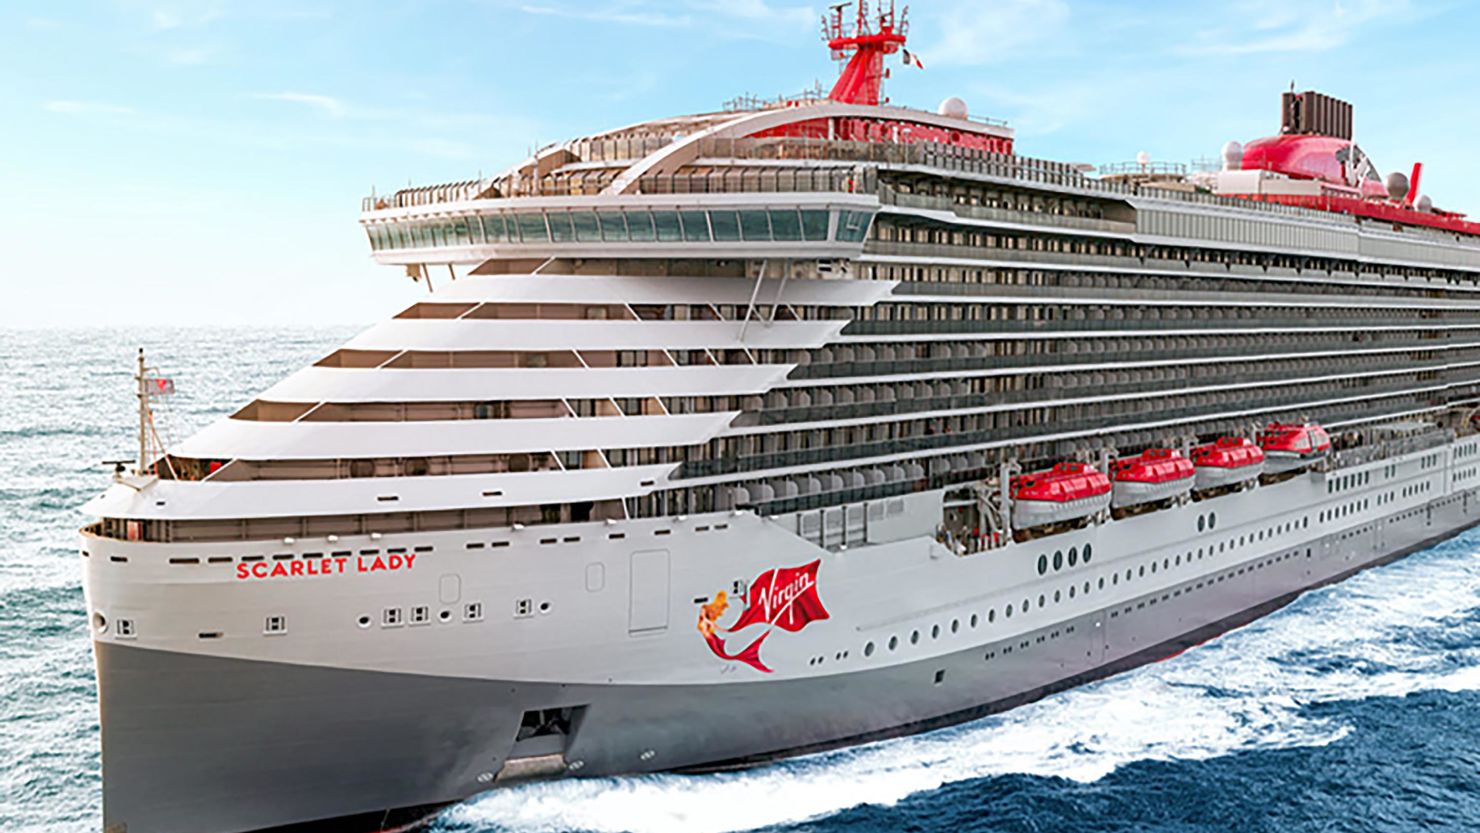 The Scarlet Lady embarks on its first voyage around the Caribbean in October.